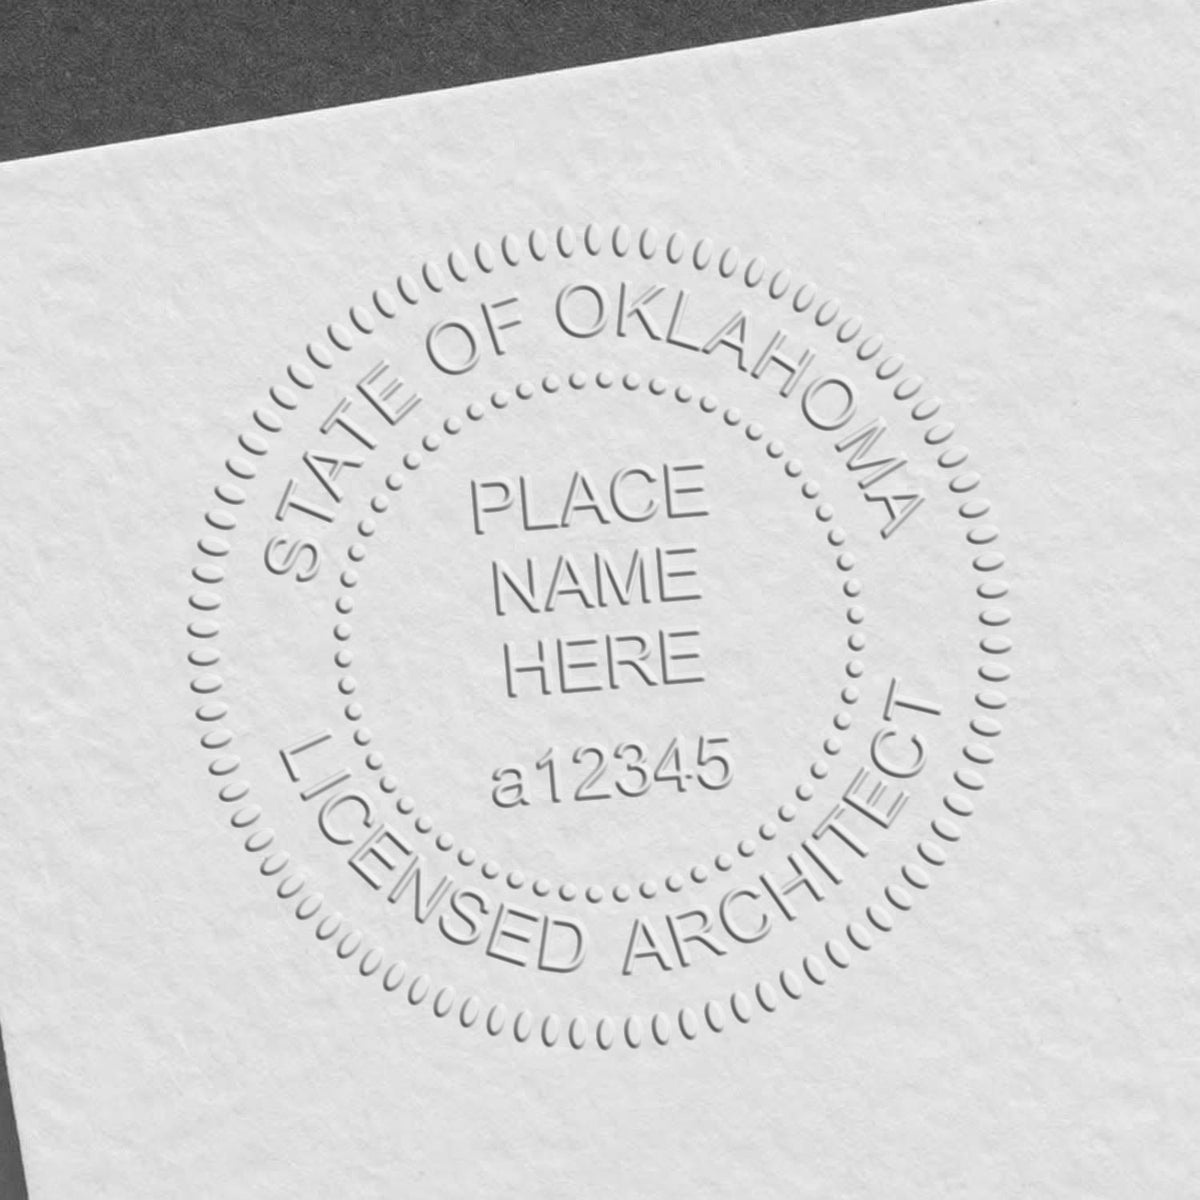 The Gift Oklahoma Architect Seal stamp impression comes to life with a crisp, detailed image stamped on paper - showcasing true professional quality.